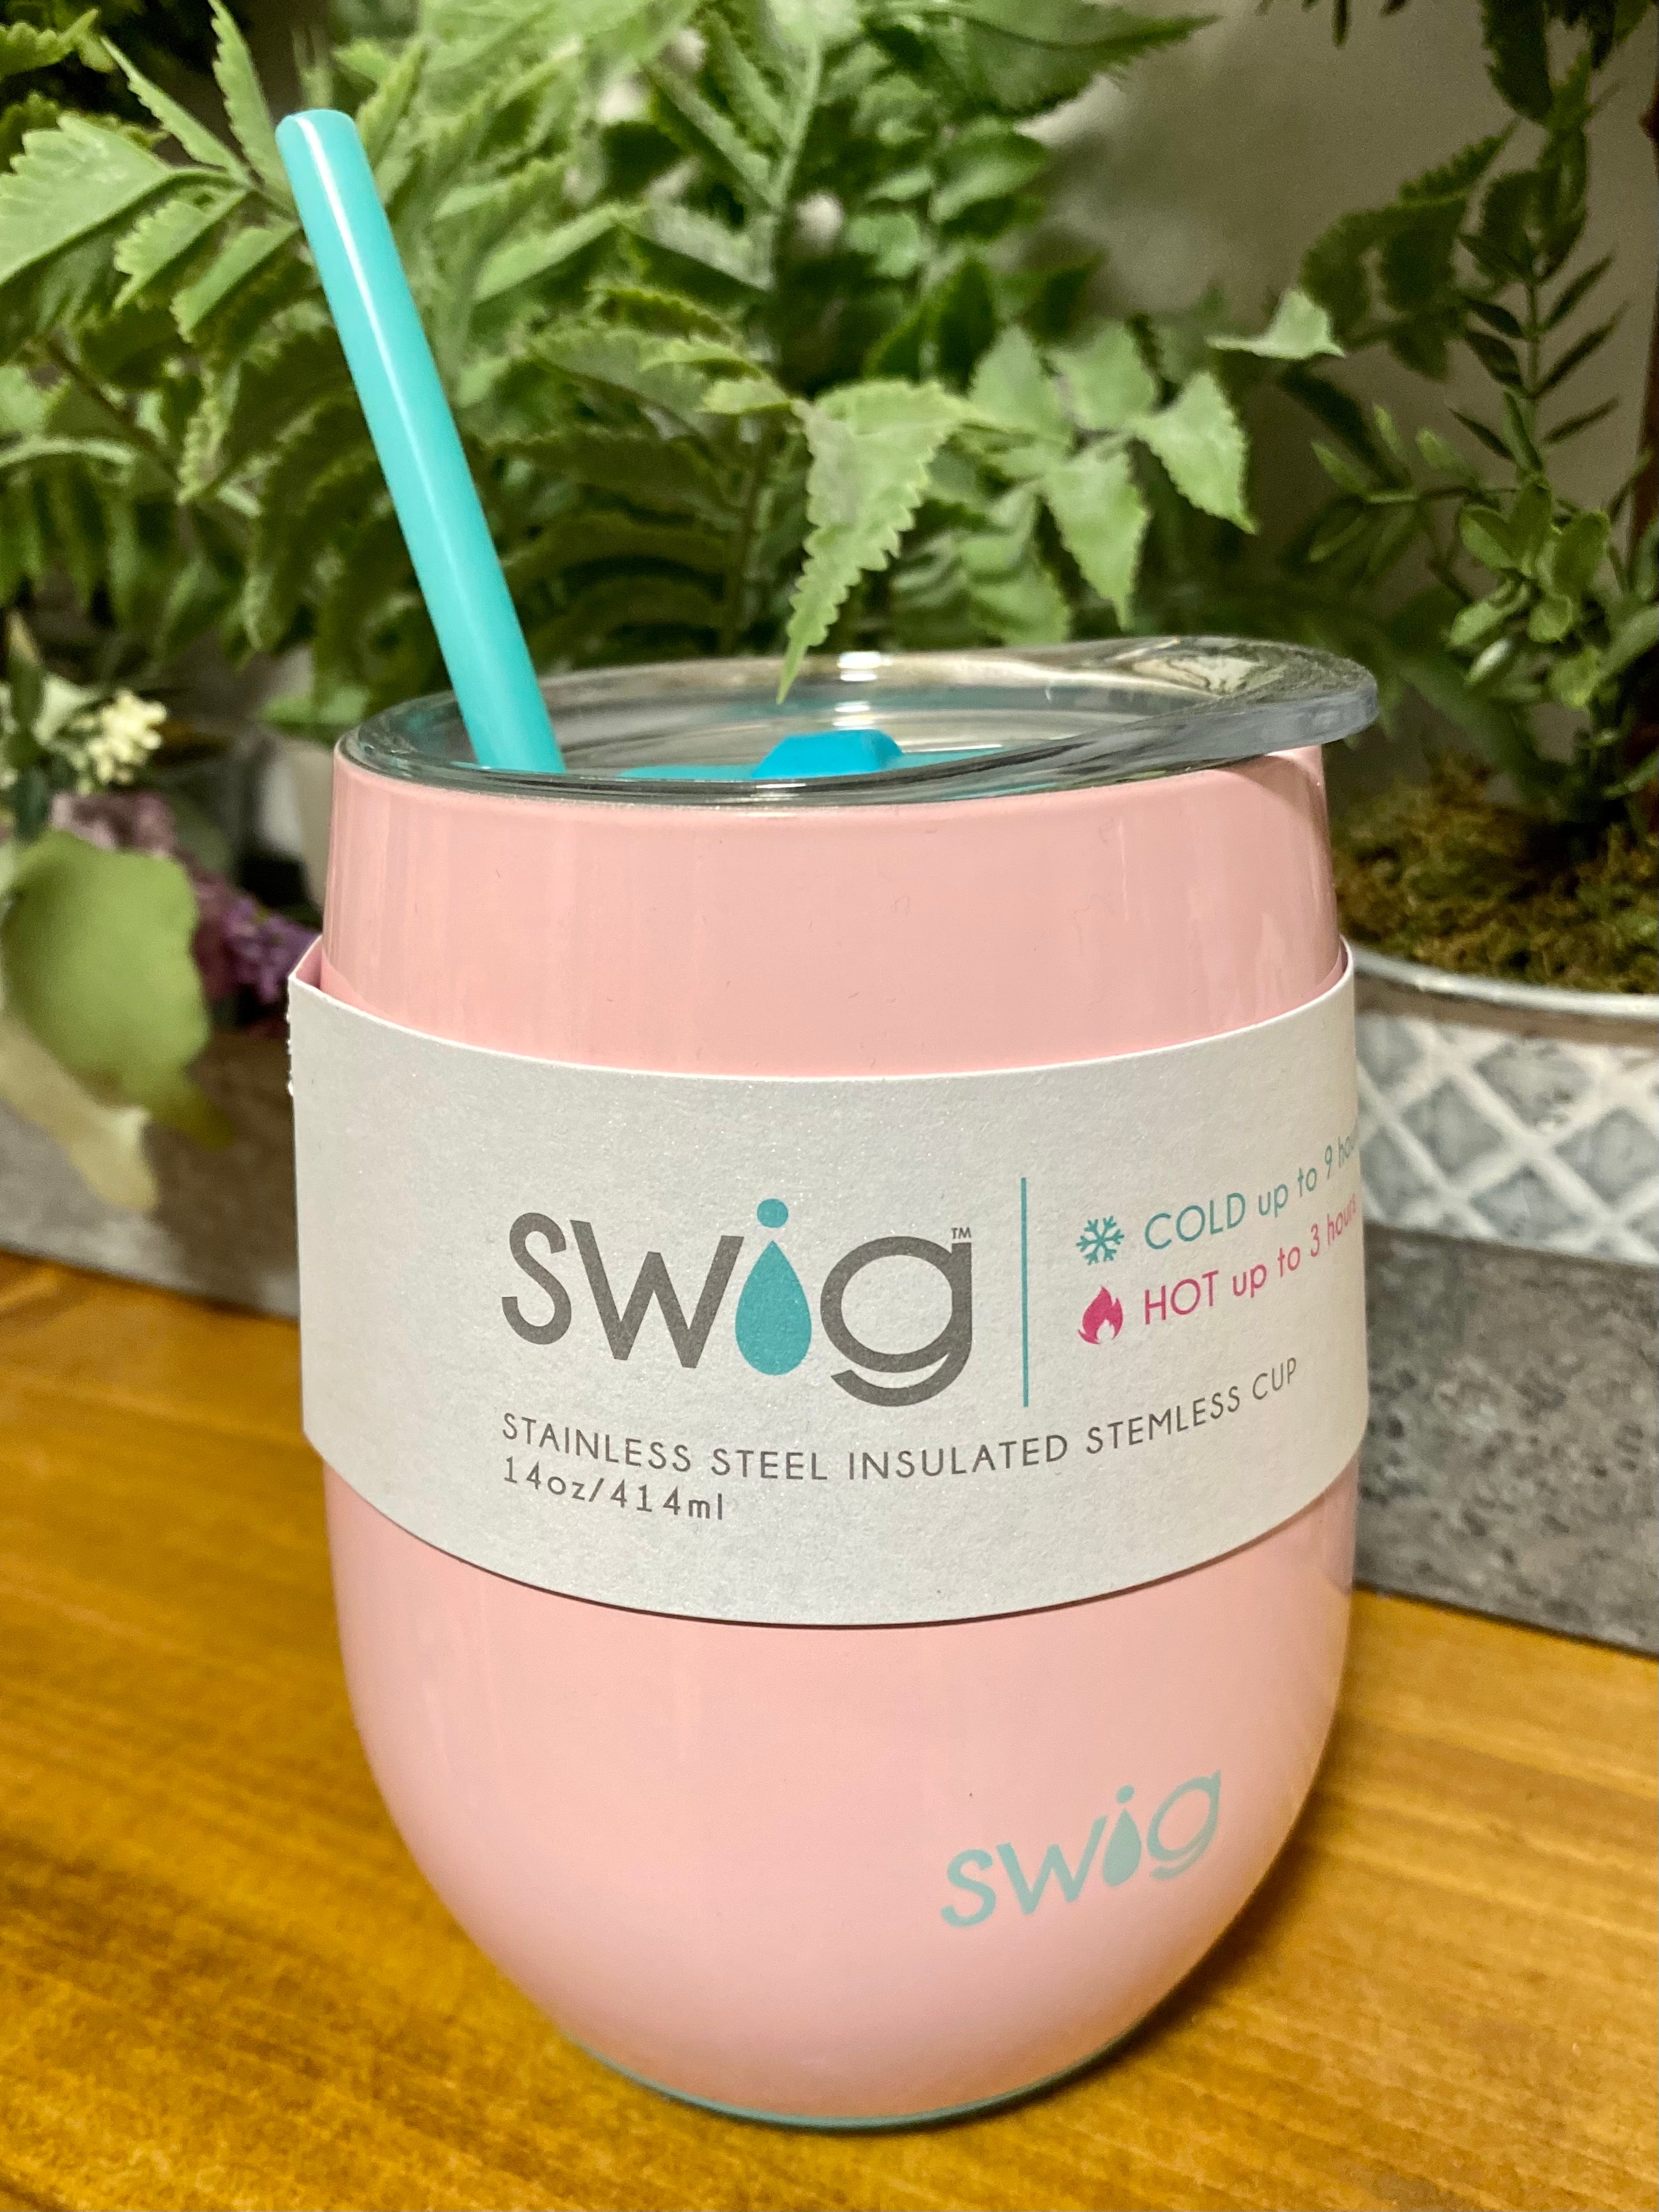 swig - Stemless Cup